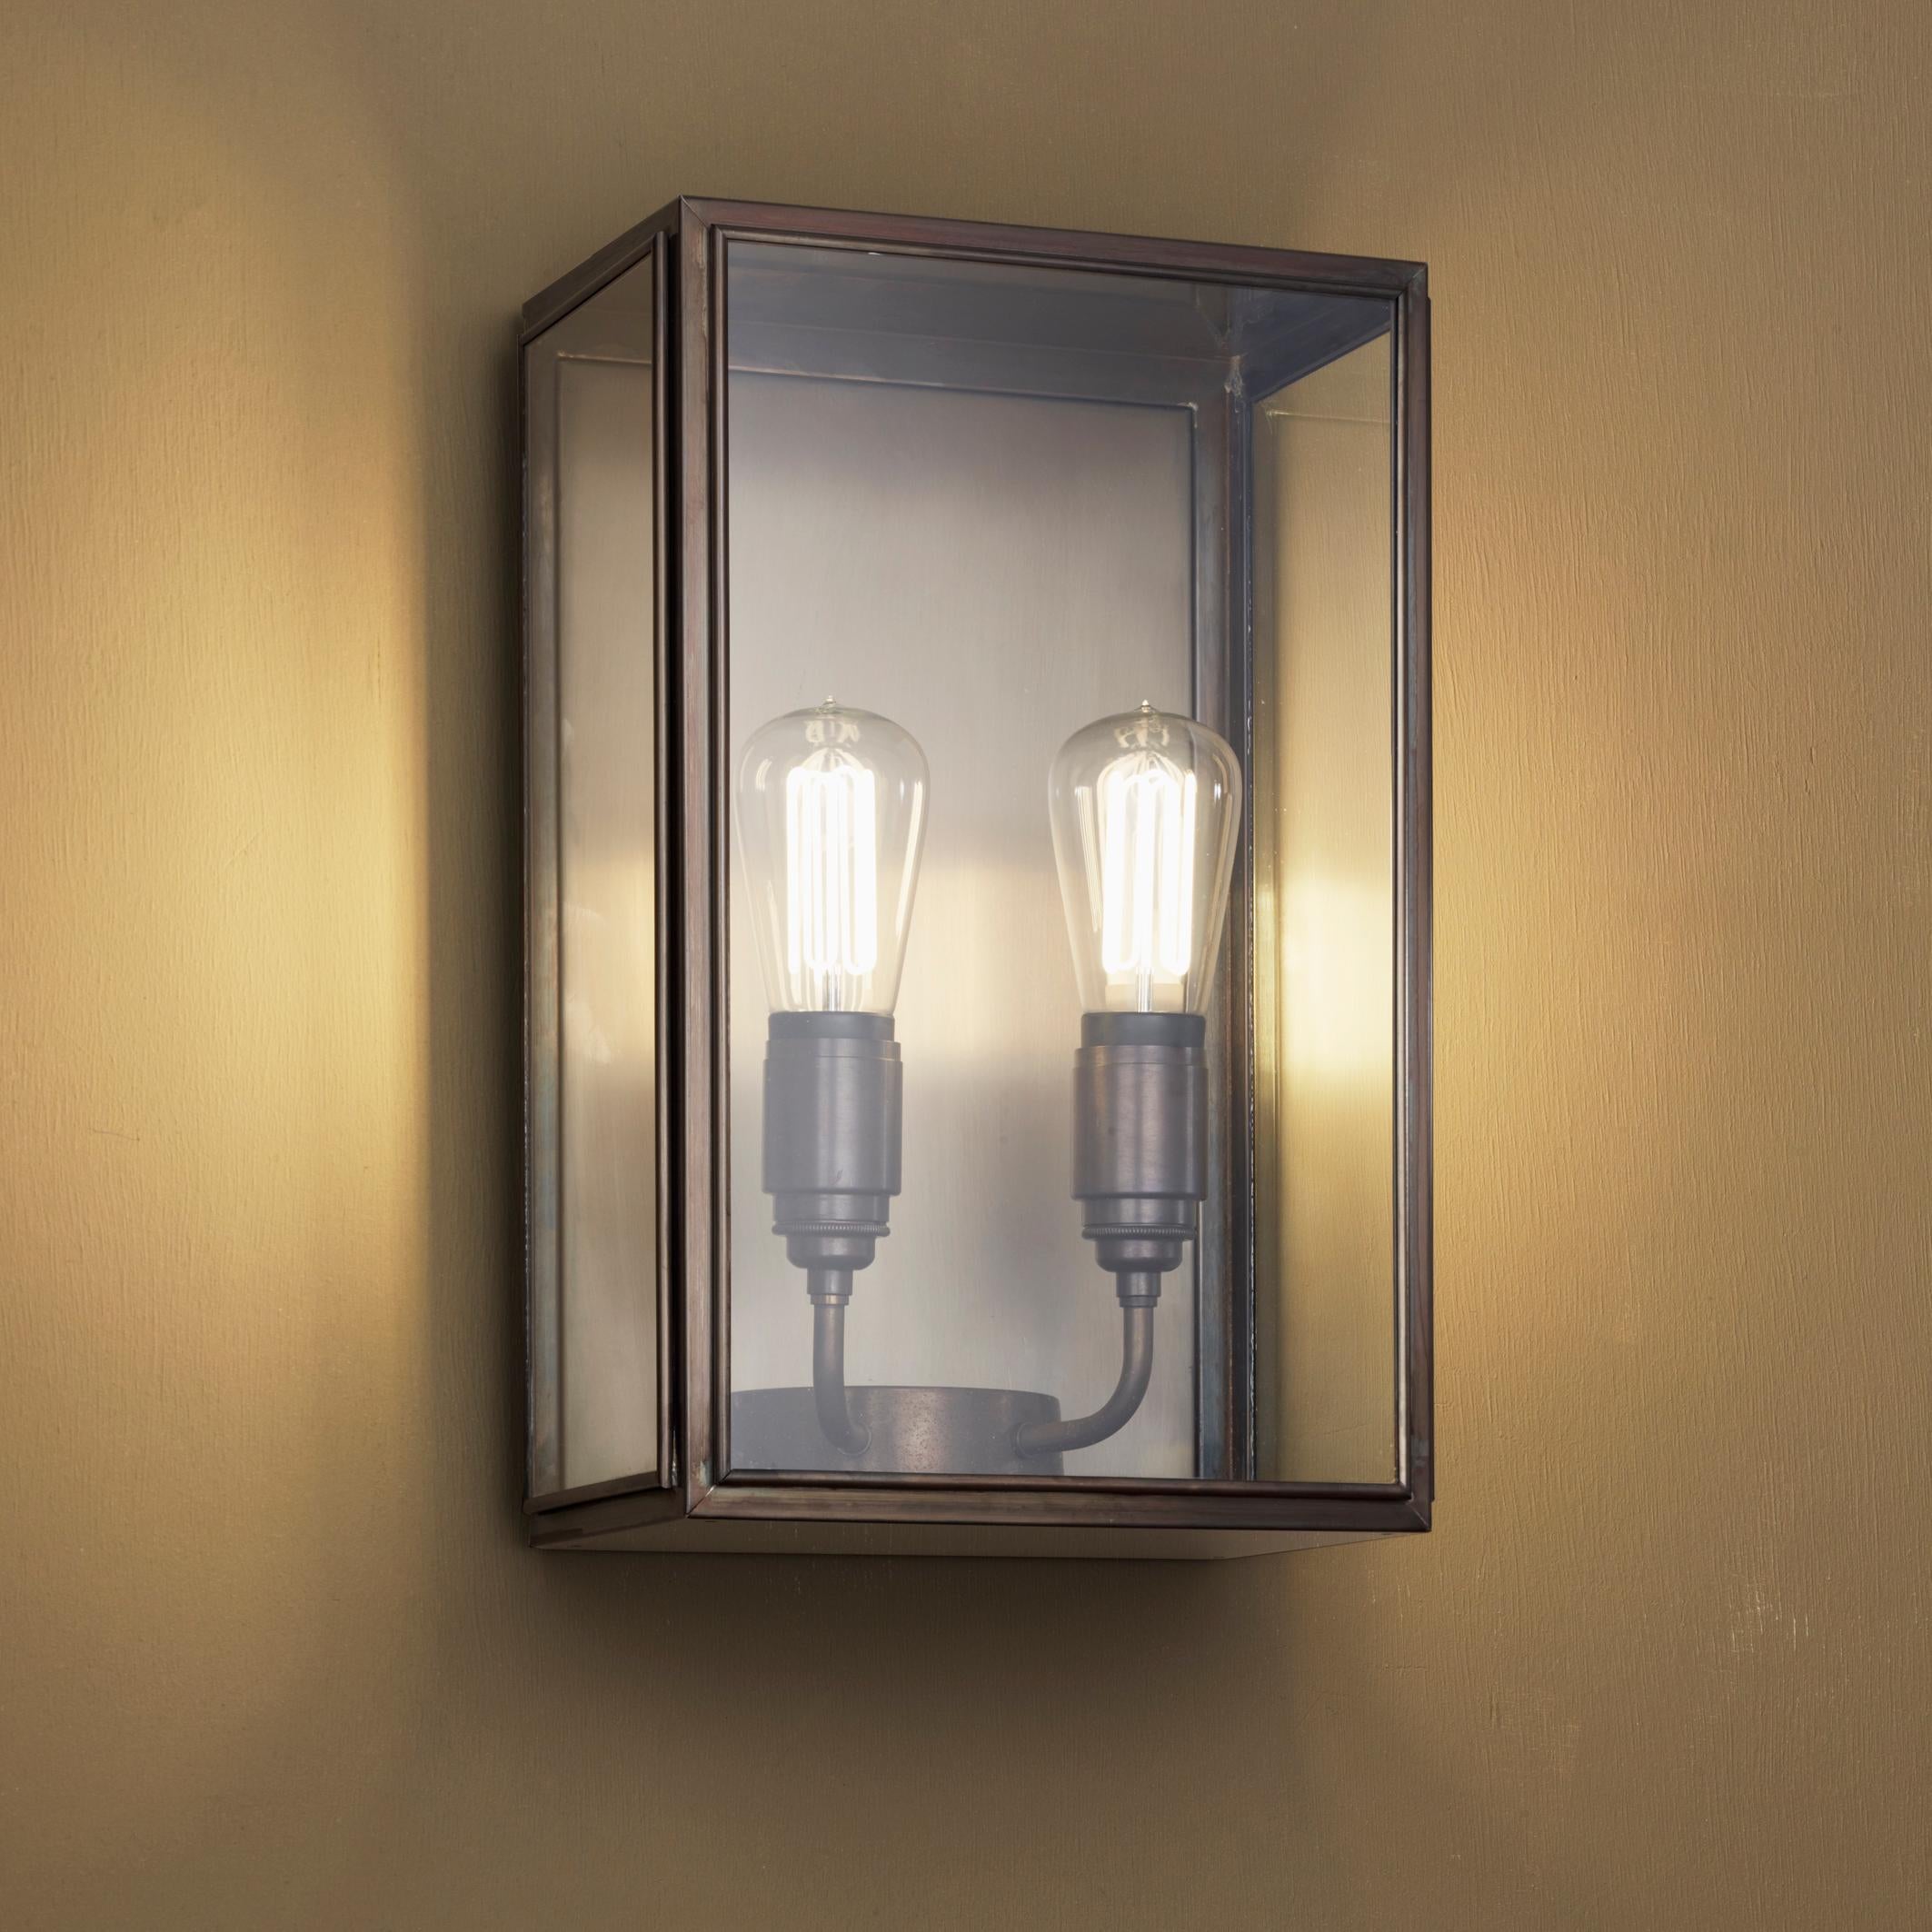 Wall light in brass with outside fitted clear glass and spring closure. For indoor and outdoor use (IP44).

Caret squirrel cage lamp 230V E27 2 x 7,7W 2300K. Main power 230V 50Hz.